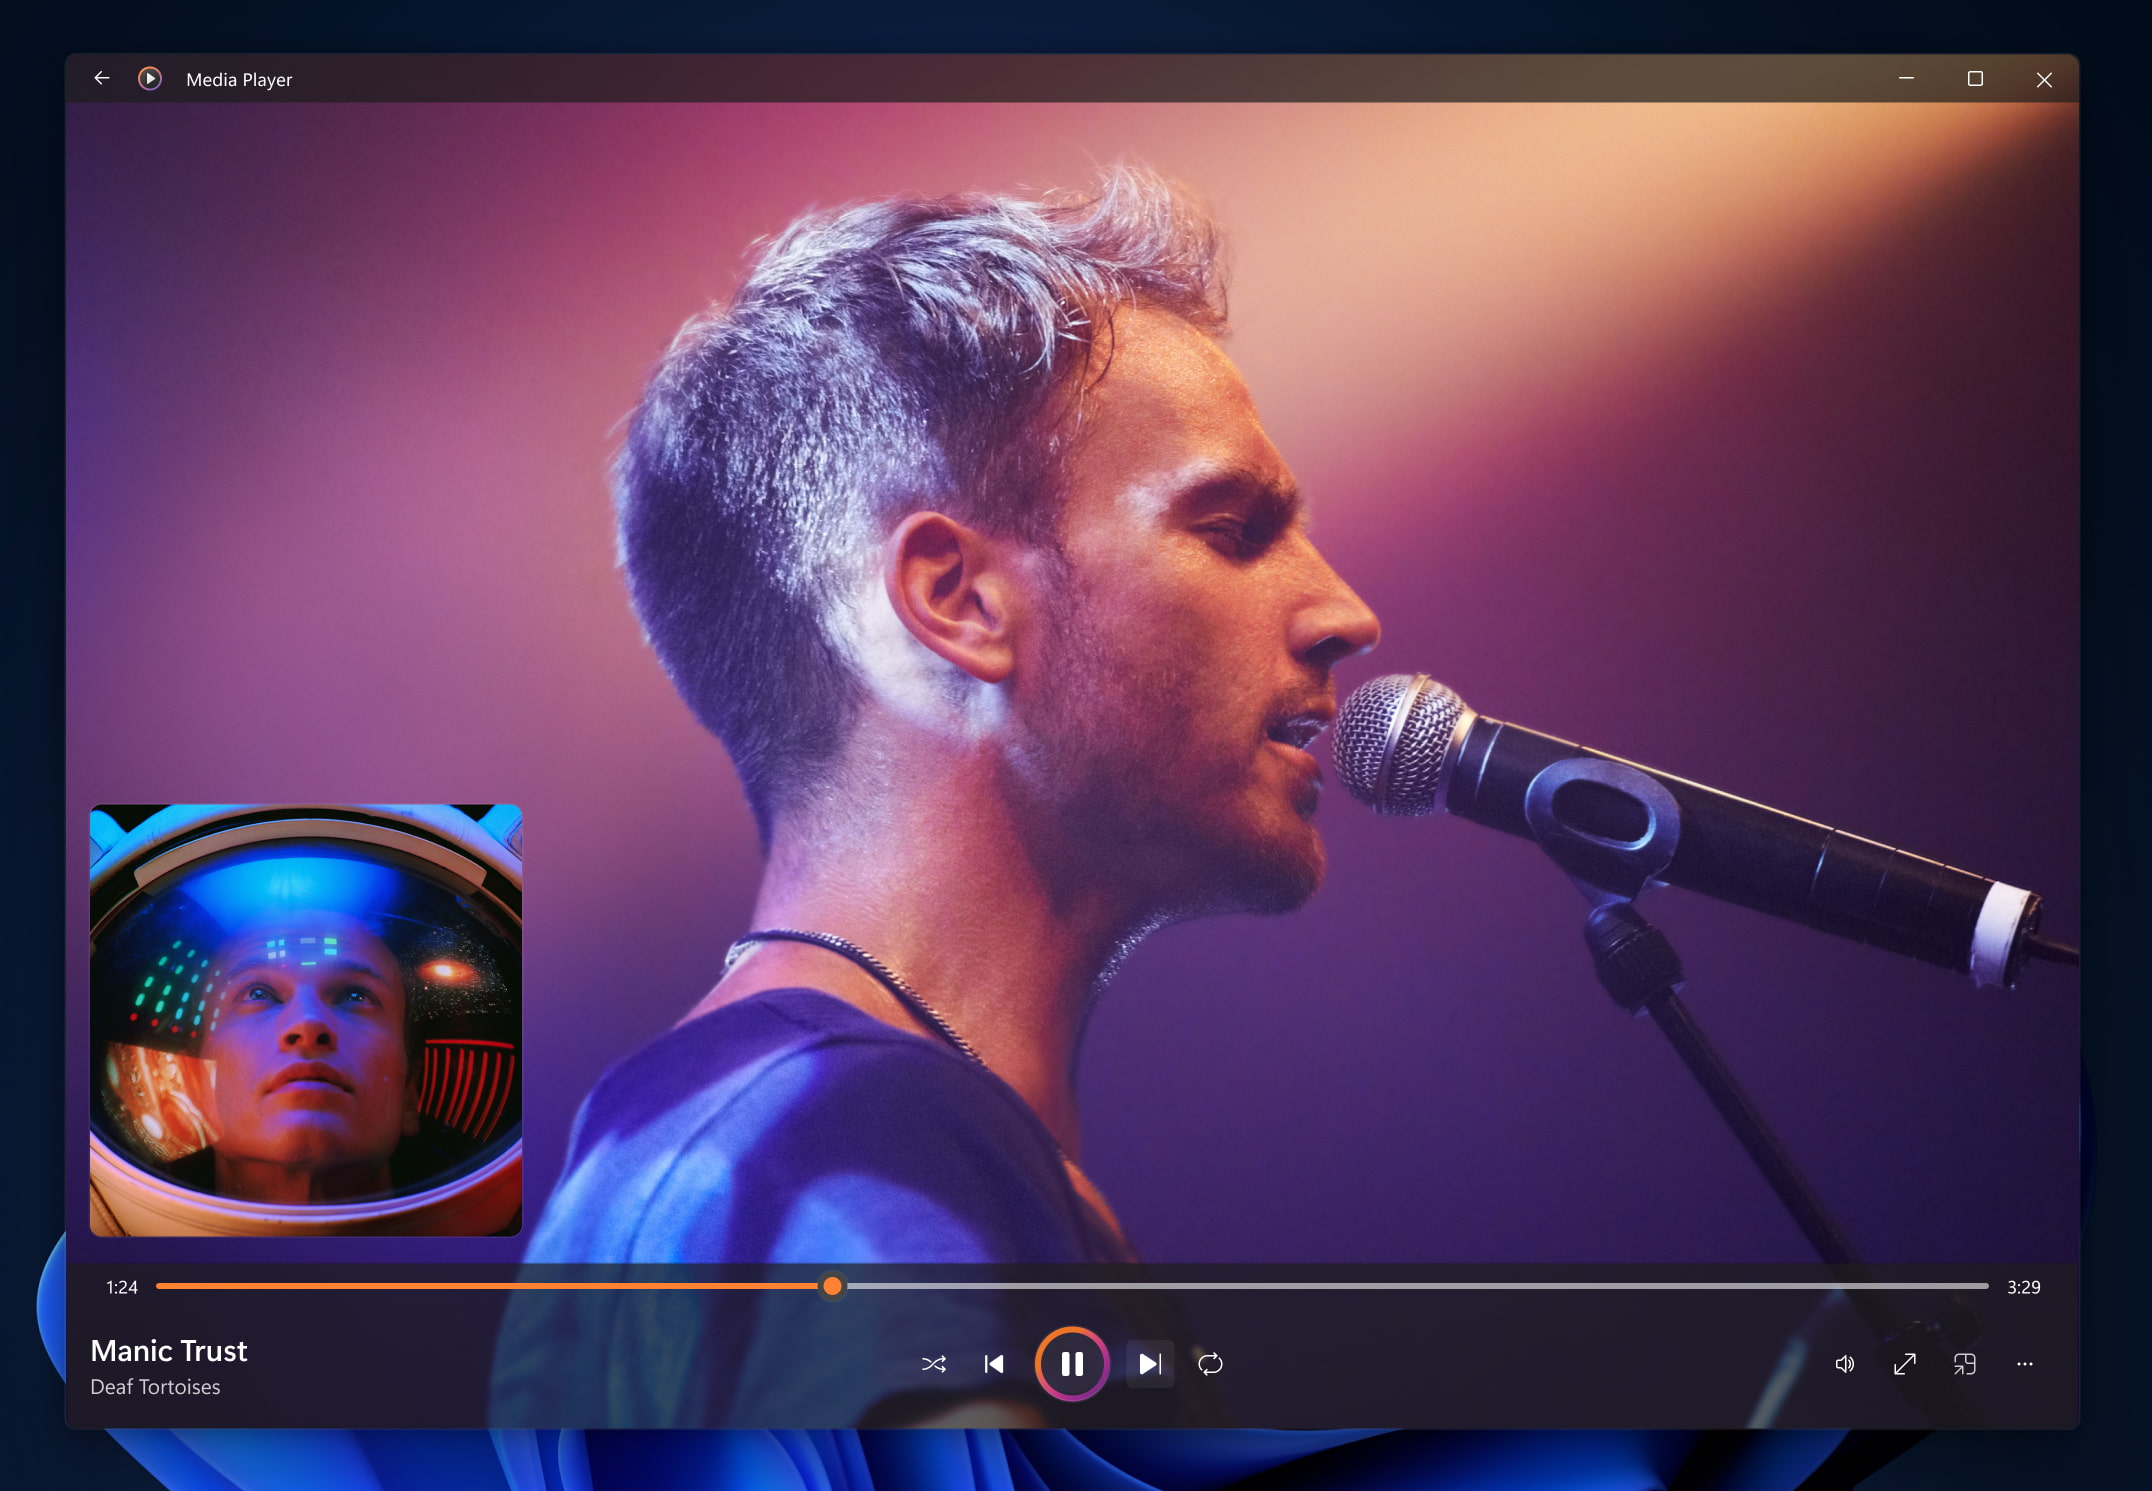 Microsoft is replacing Windows Media Player with Media Player for Windows 11